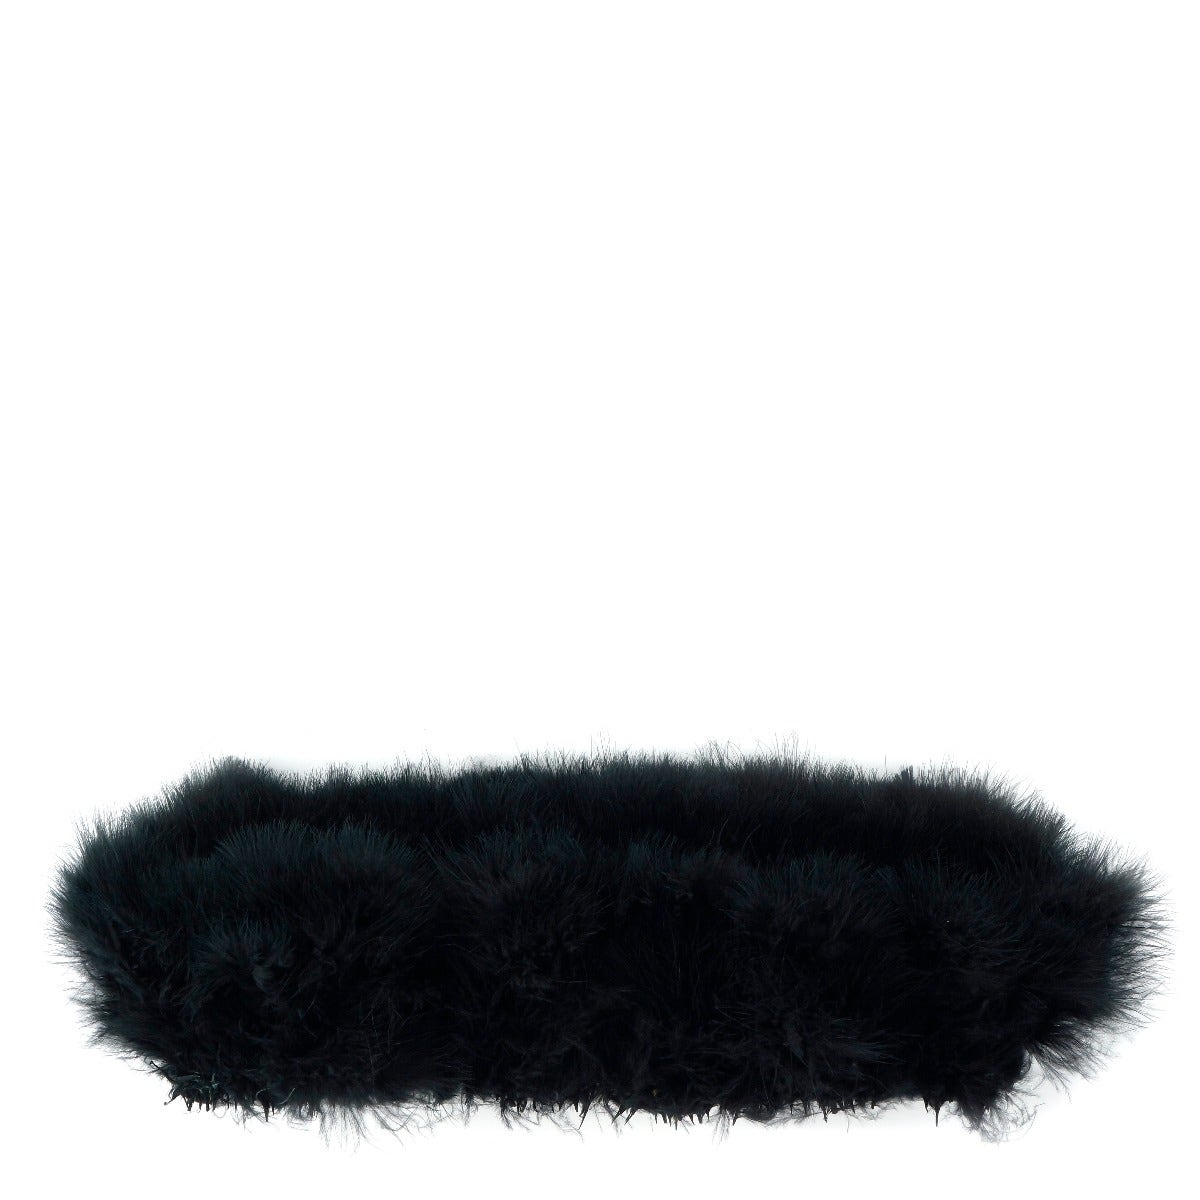 TURKEY MARABOU GOOD QUILL FEATHERS 3-4" - BLACK